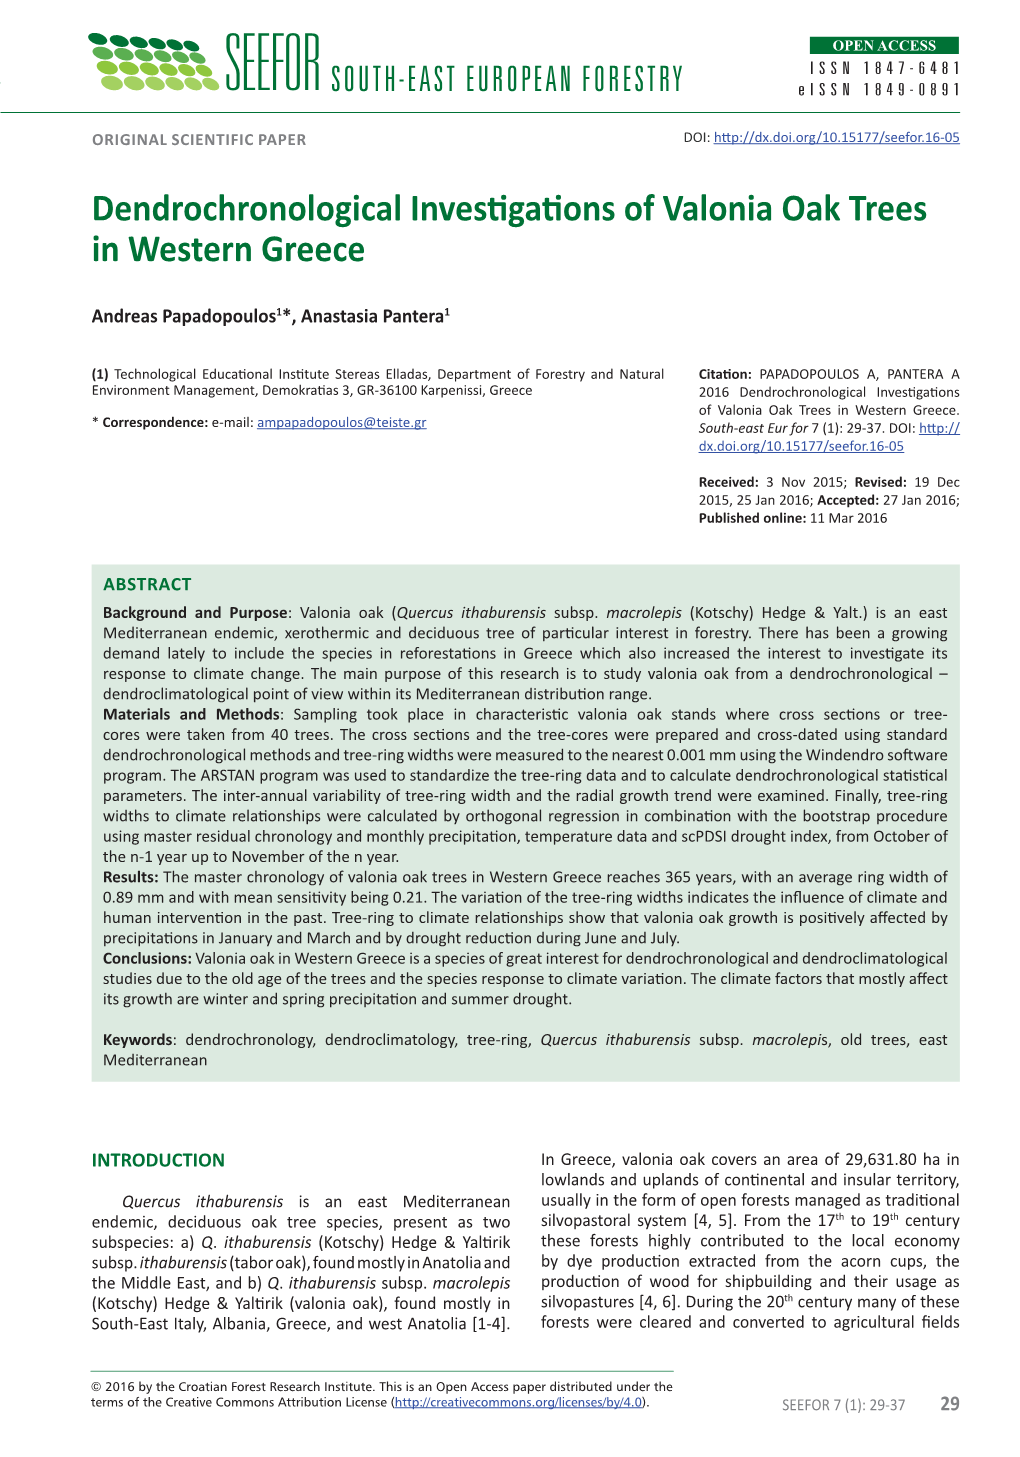 Dendrochronological Investigations of Valonia Oak Trees in Western Greece